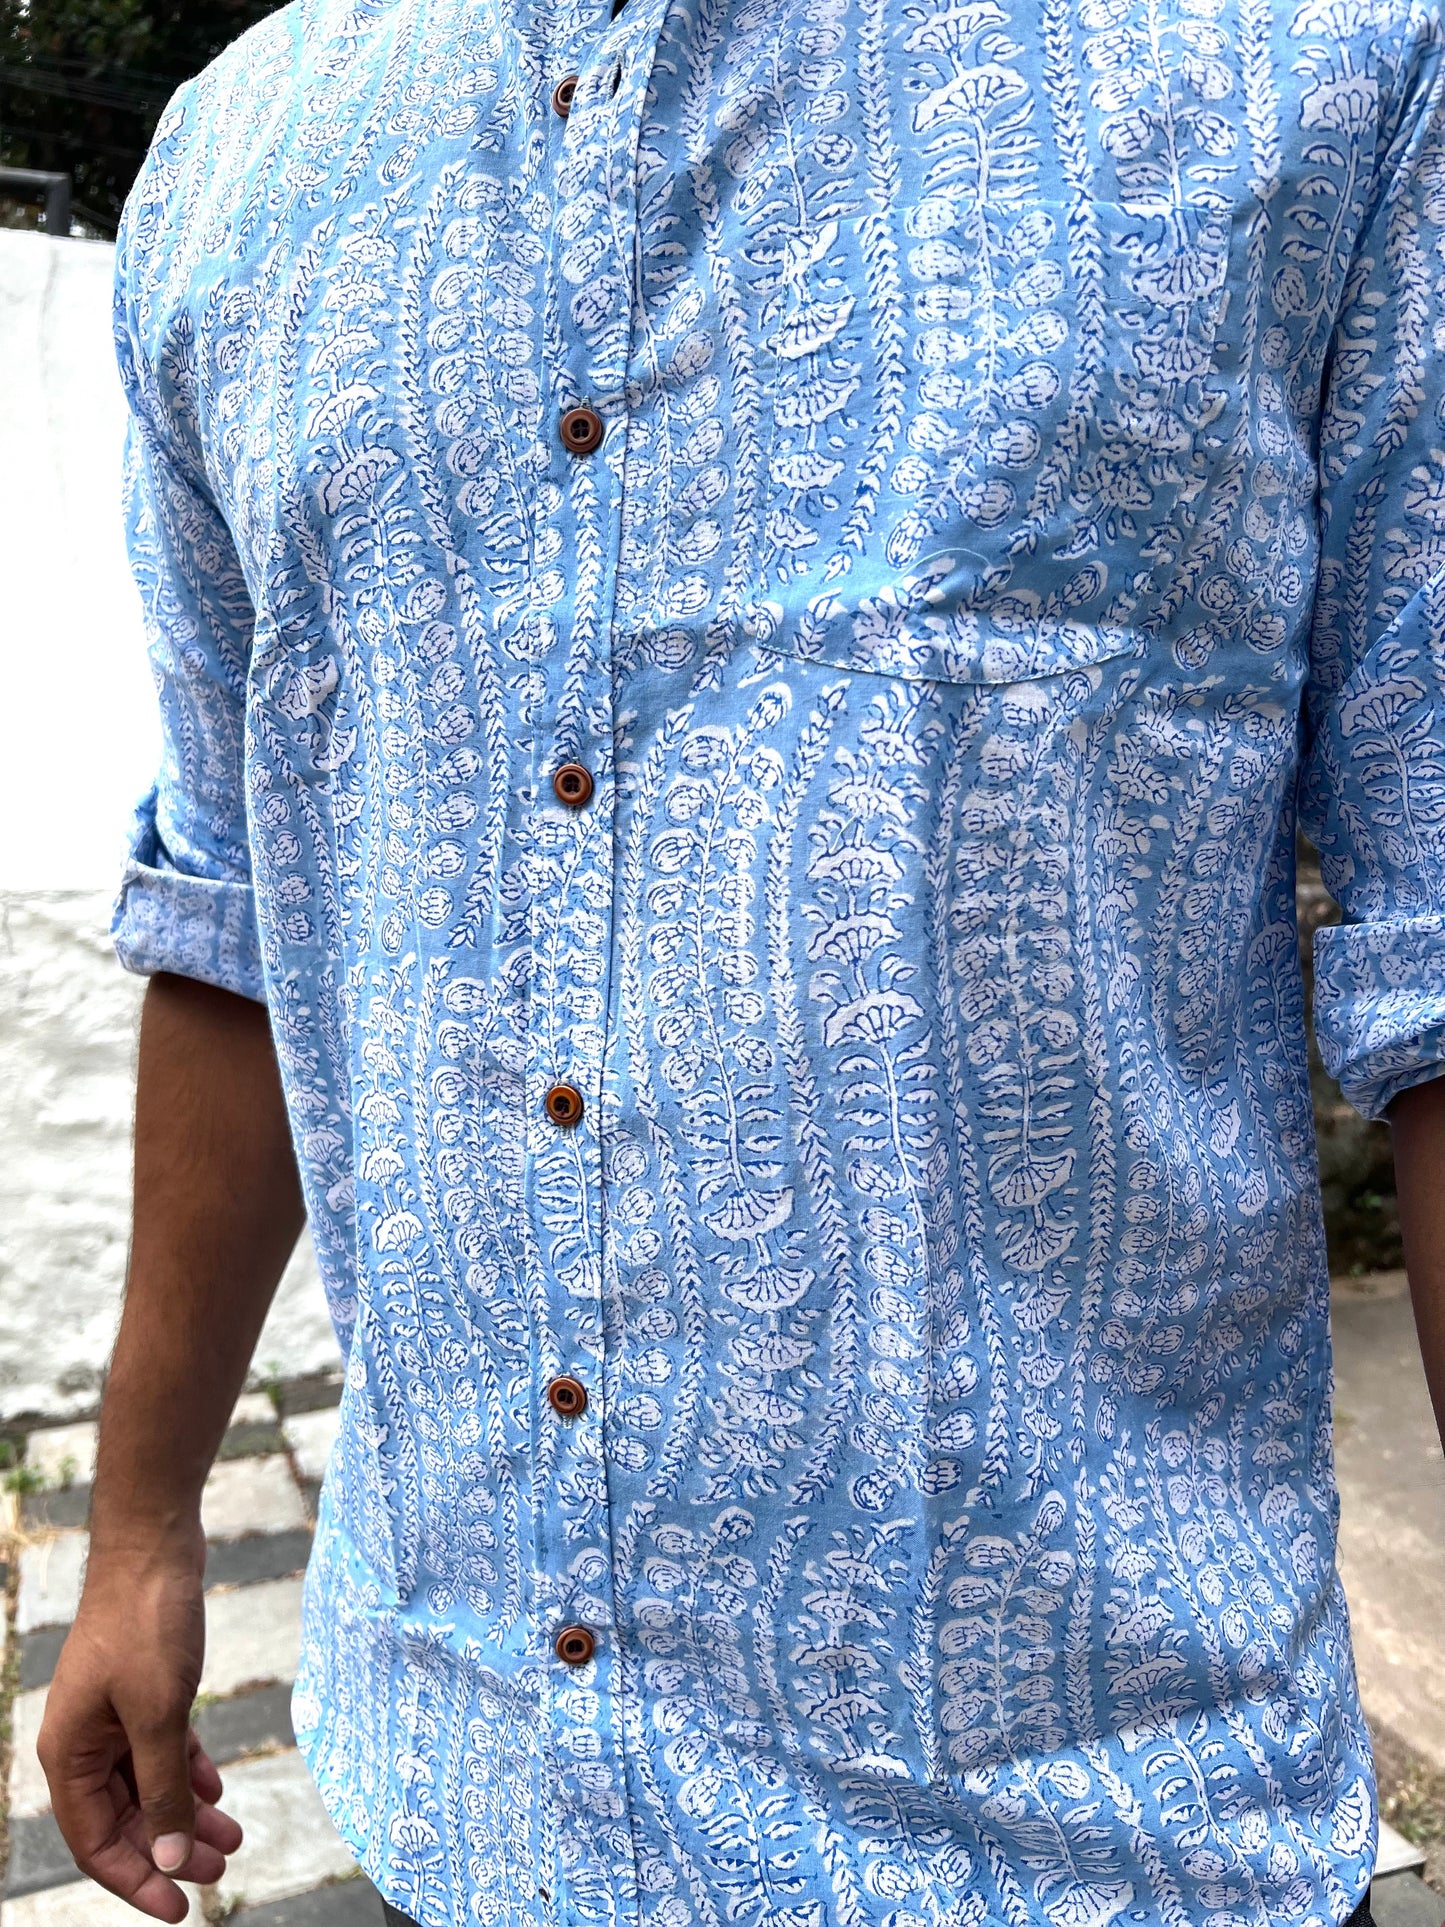 Southloom Jaipur Cotton White and Blue Hand Block Printed Shirt (Full Sleeves)